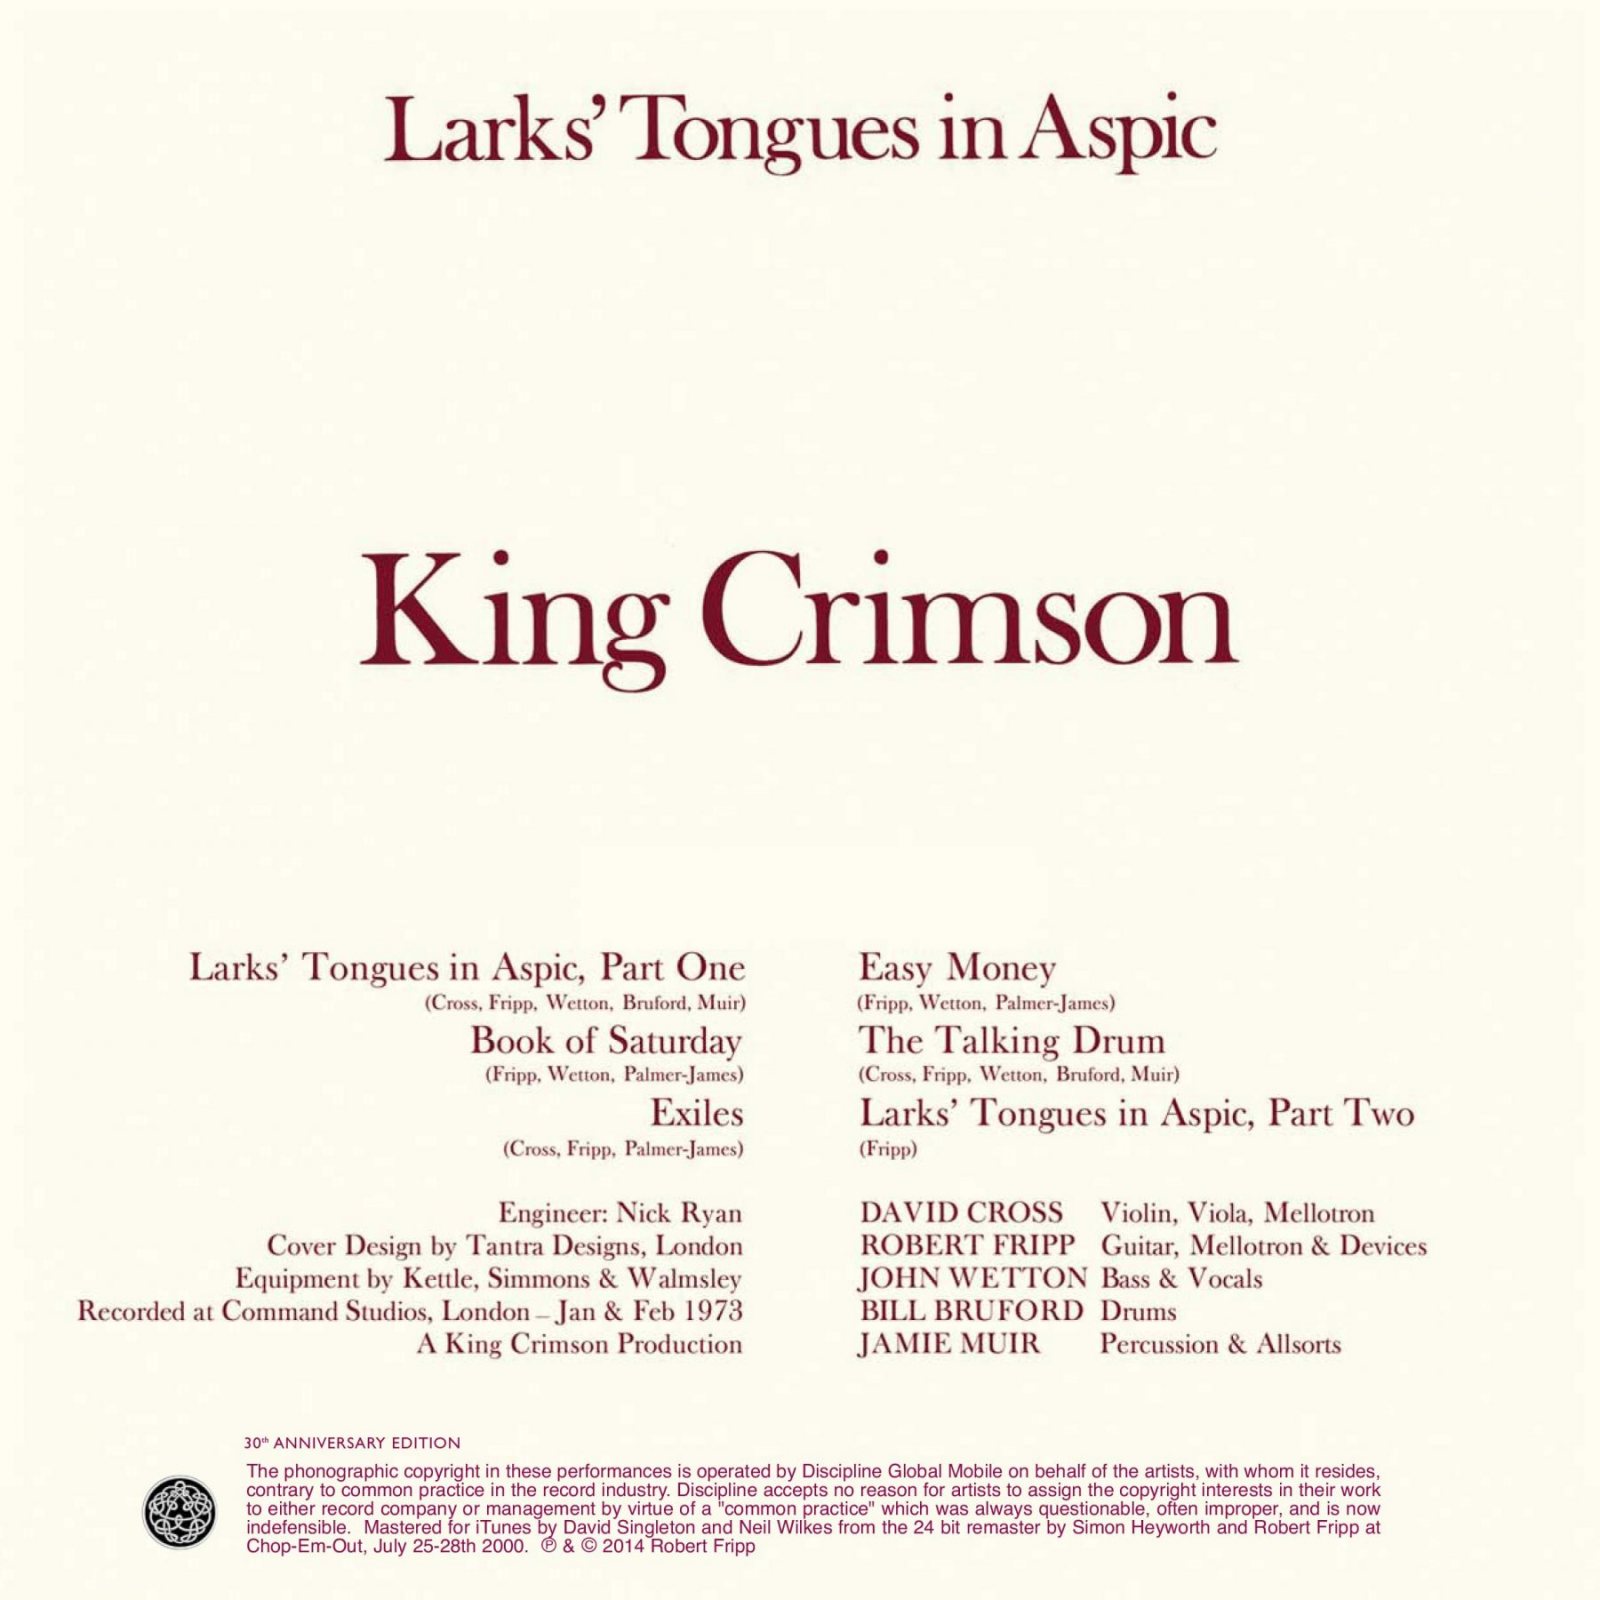 1308232188_Larks-Tongues-In-Aspic-(Expanded--Remastered-Original-Album-Mix)-8.thumb.jpg.615378b4ce0d92490a7a20a186226b55.jpg